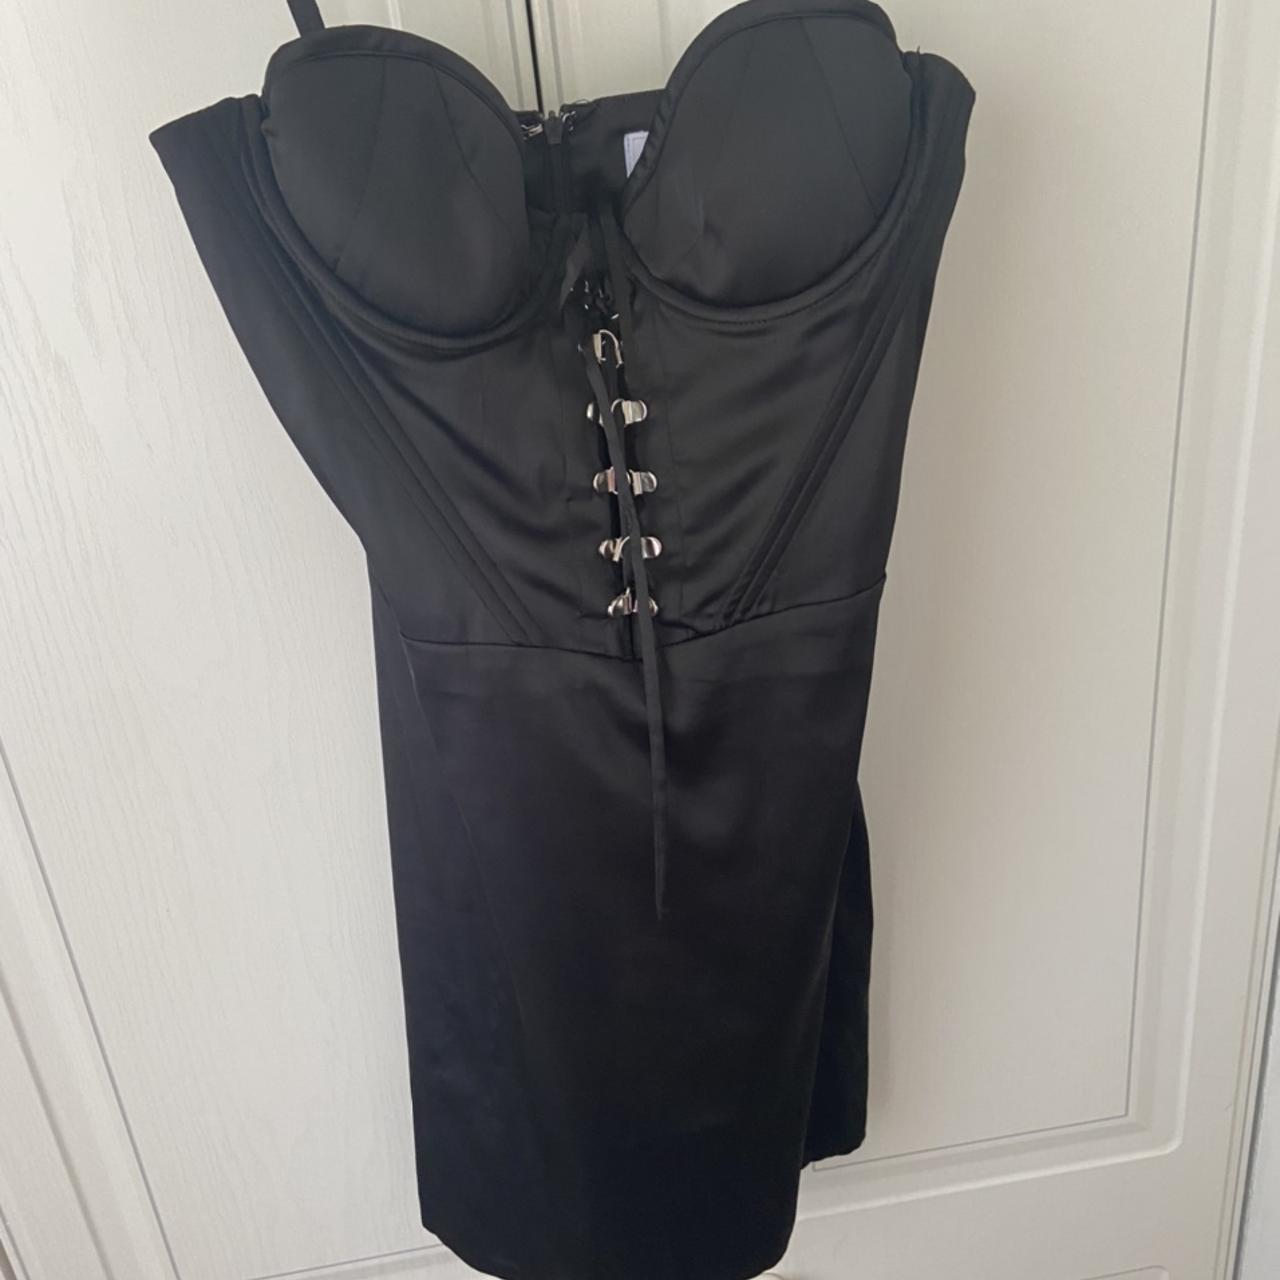 Oh Polly Black Corset Dress - size 8. Worn once in... - Depop